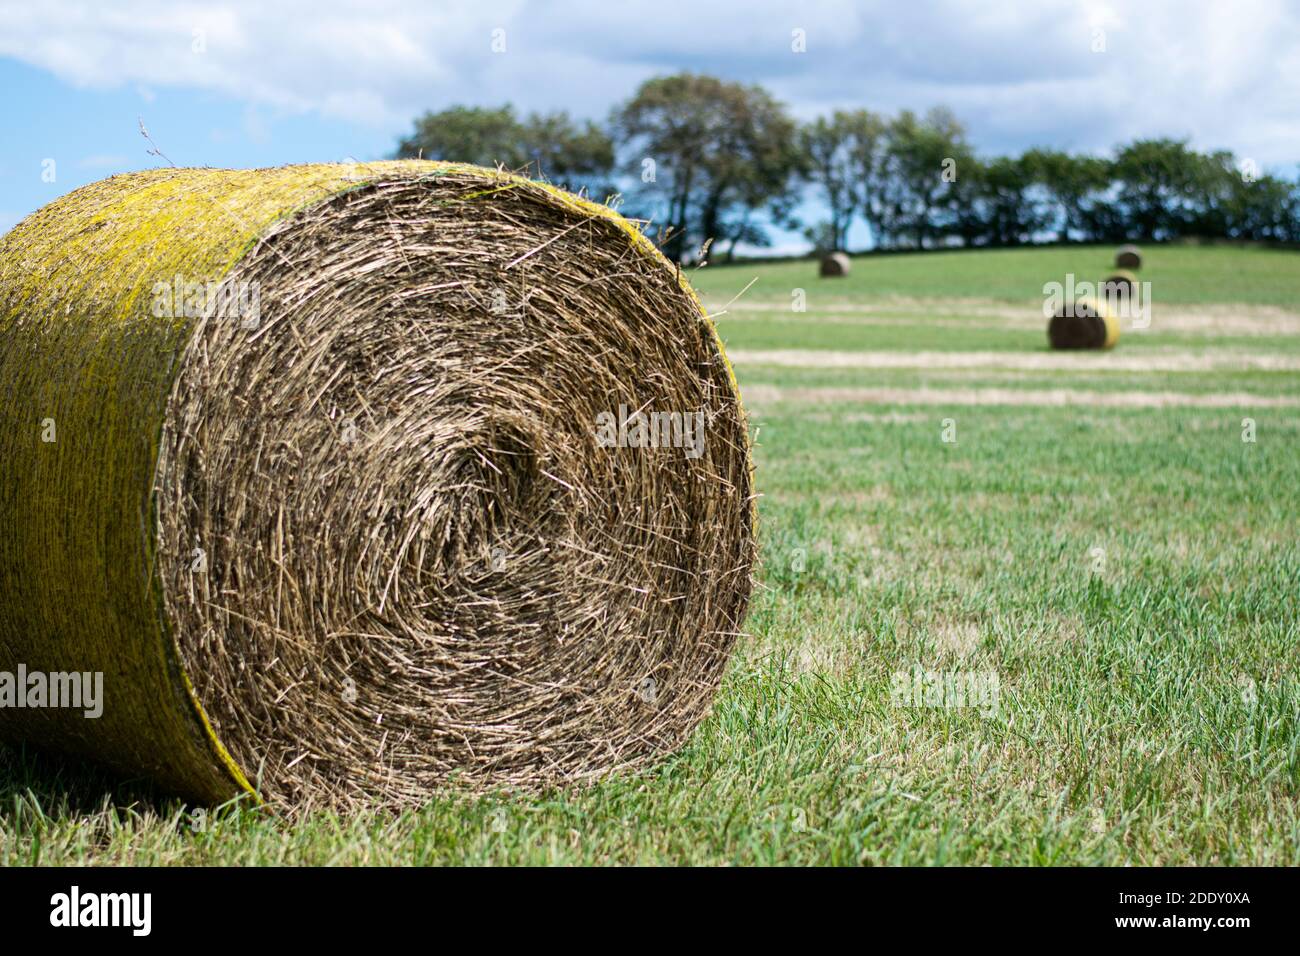 A hay ball on the field this summer day. More hay balls in the background as it is harvest season. Photo taken in Skåne, Sweden Stock Photo